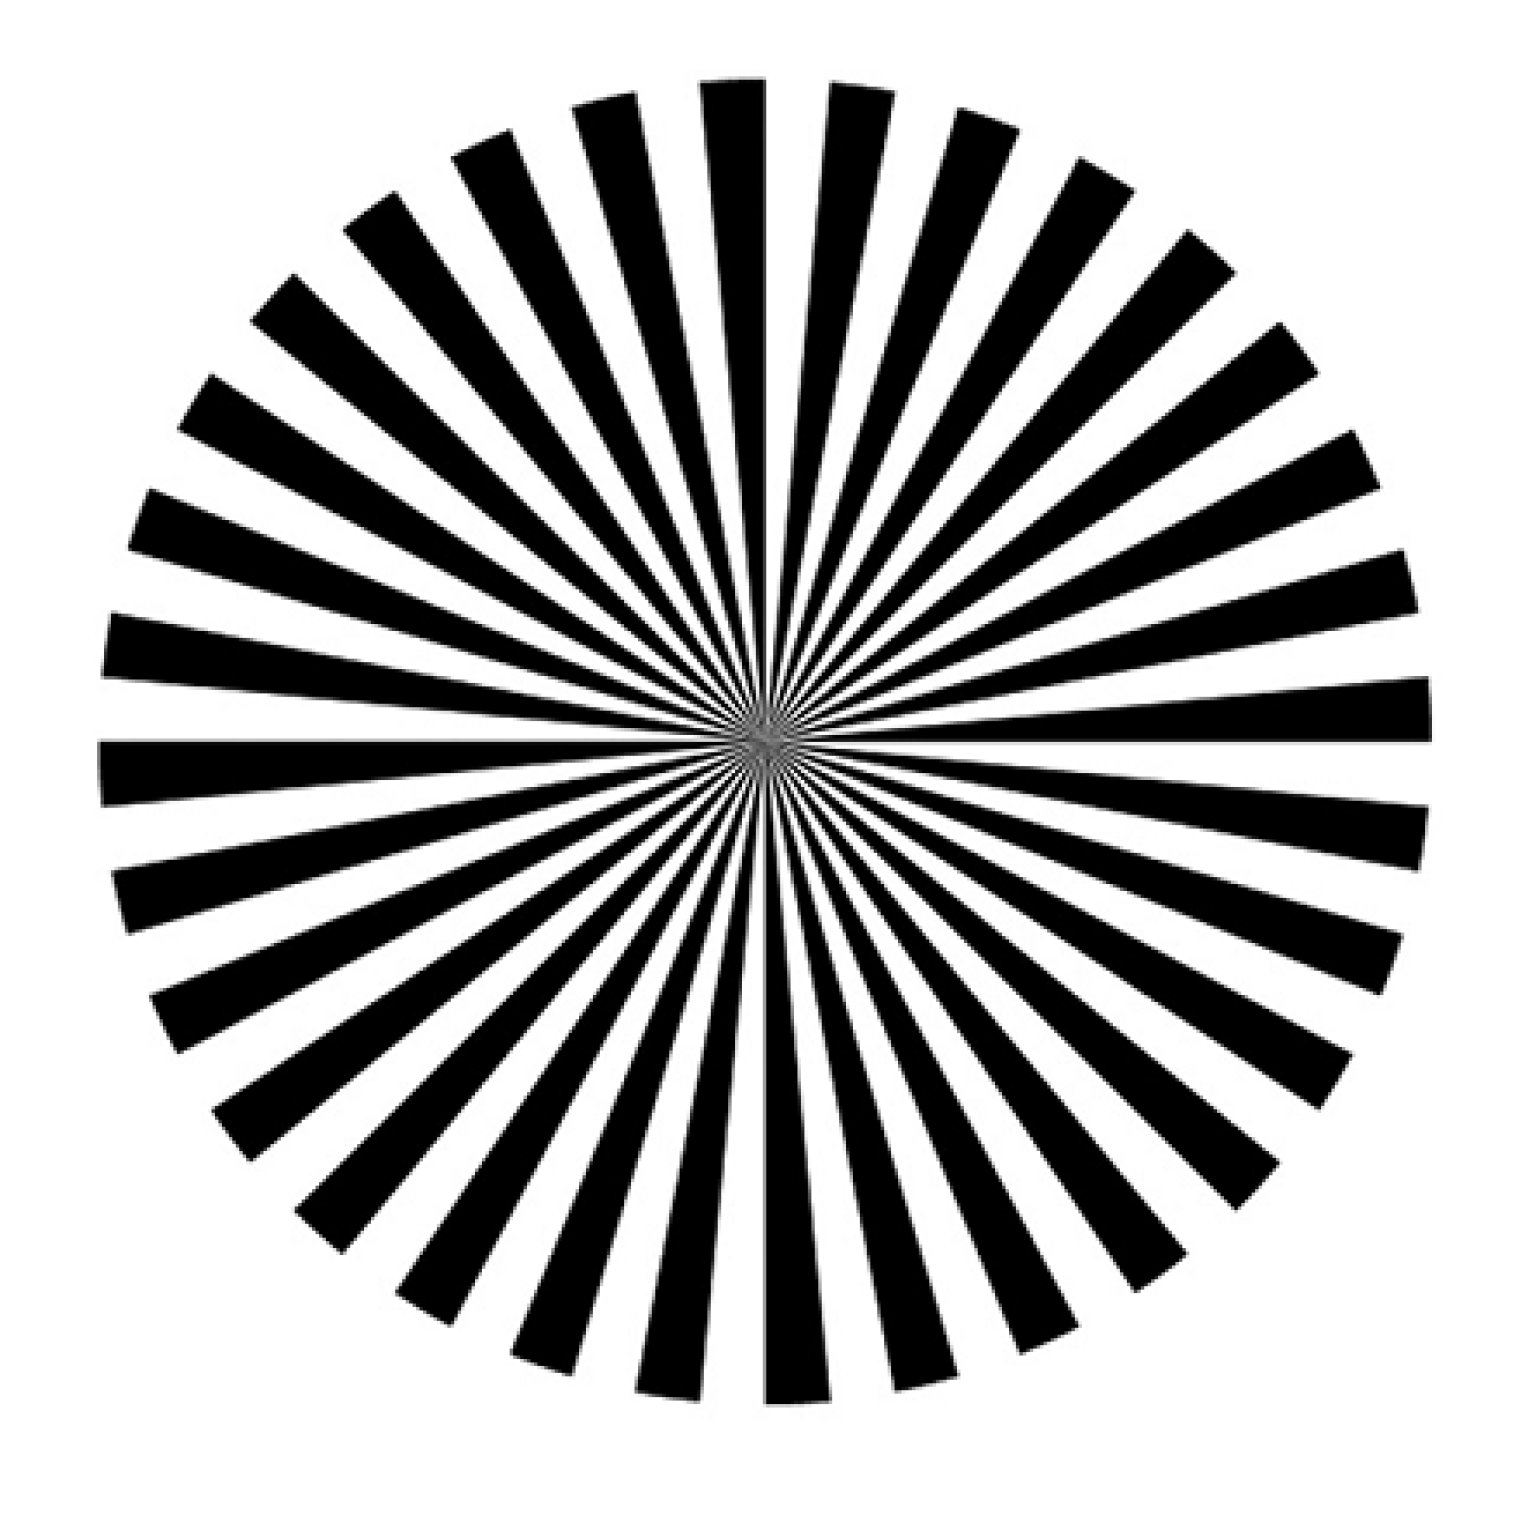 Optical Illusion Lets You 'See' Your Brain Waves (PHOTO)